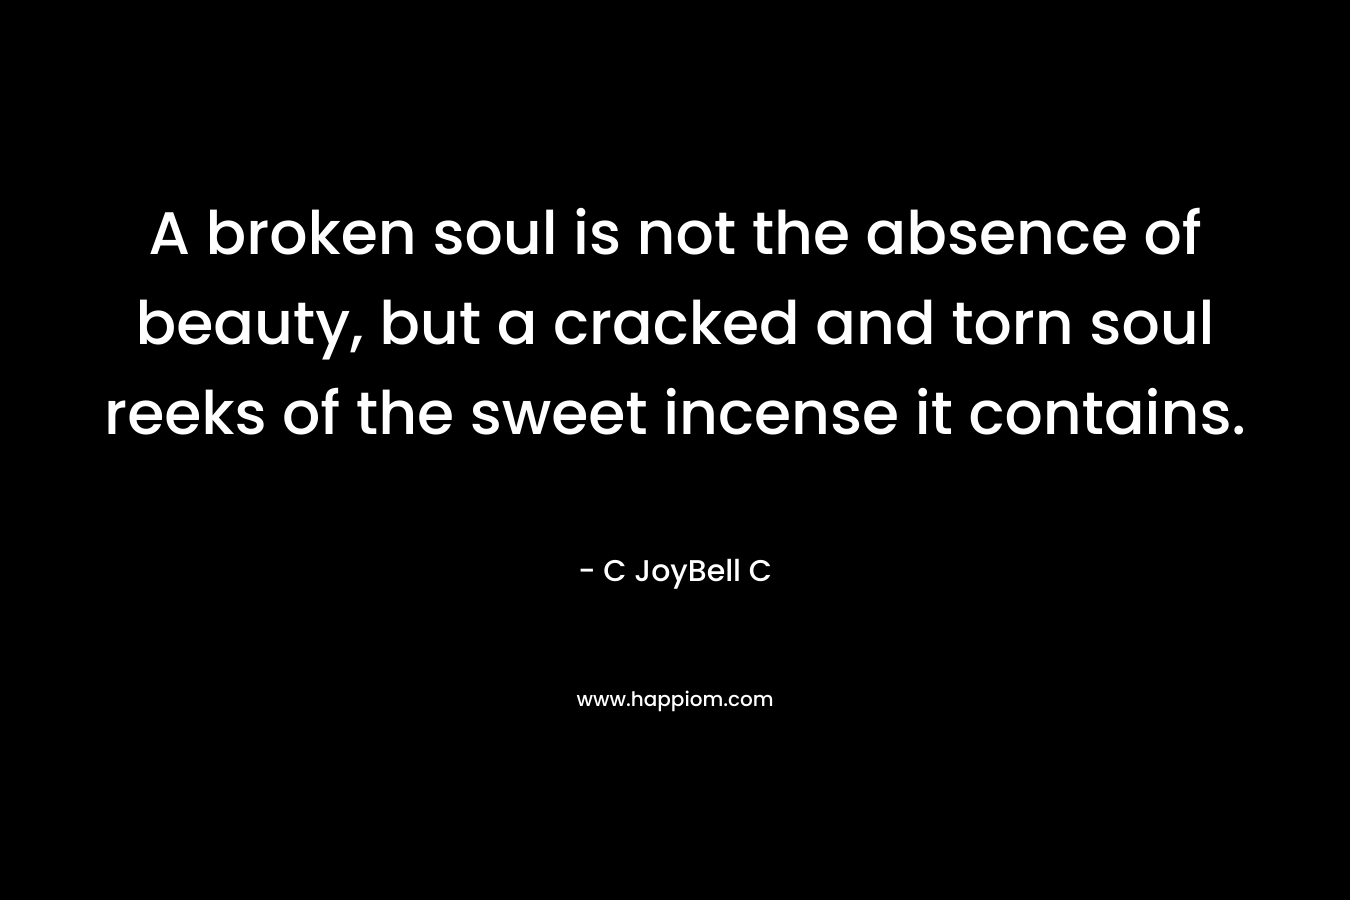 A broken soul is not the absence of beauty, but a cracked and torn soul reeks of the sweet incense it contains. – C JoyBell C